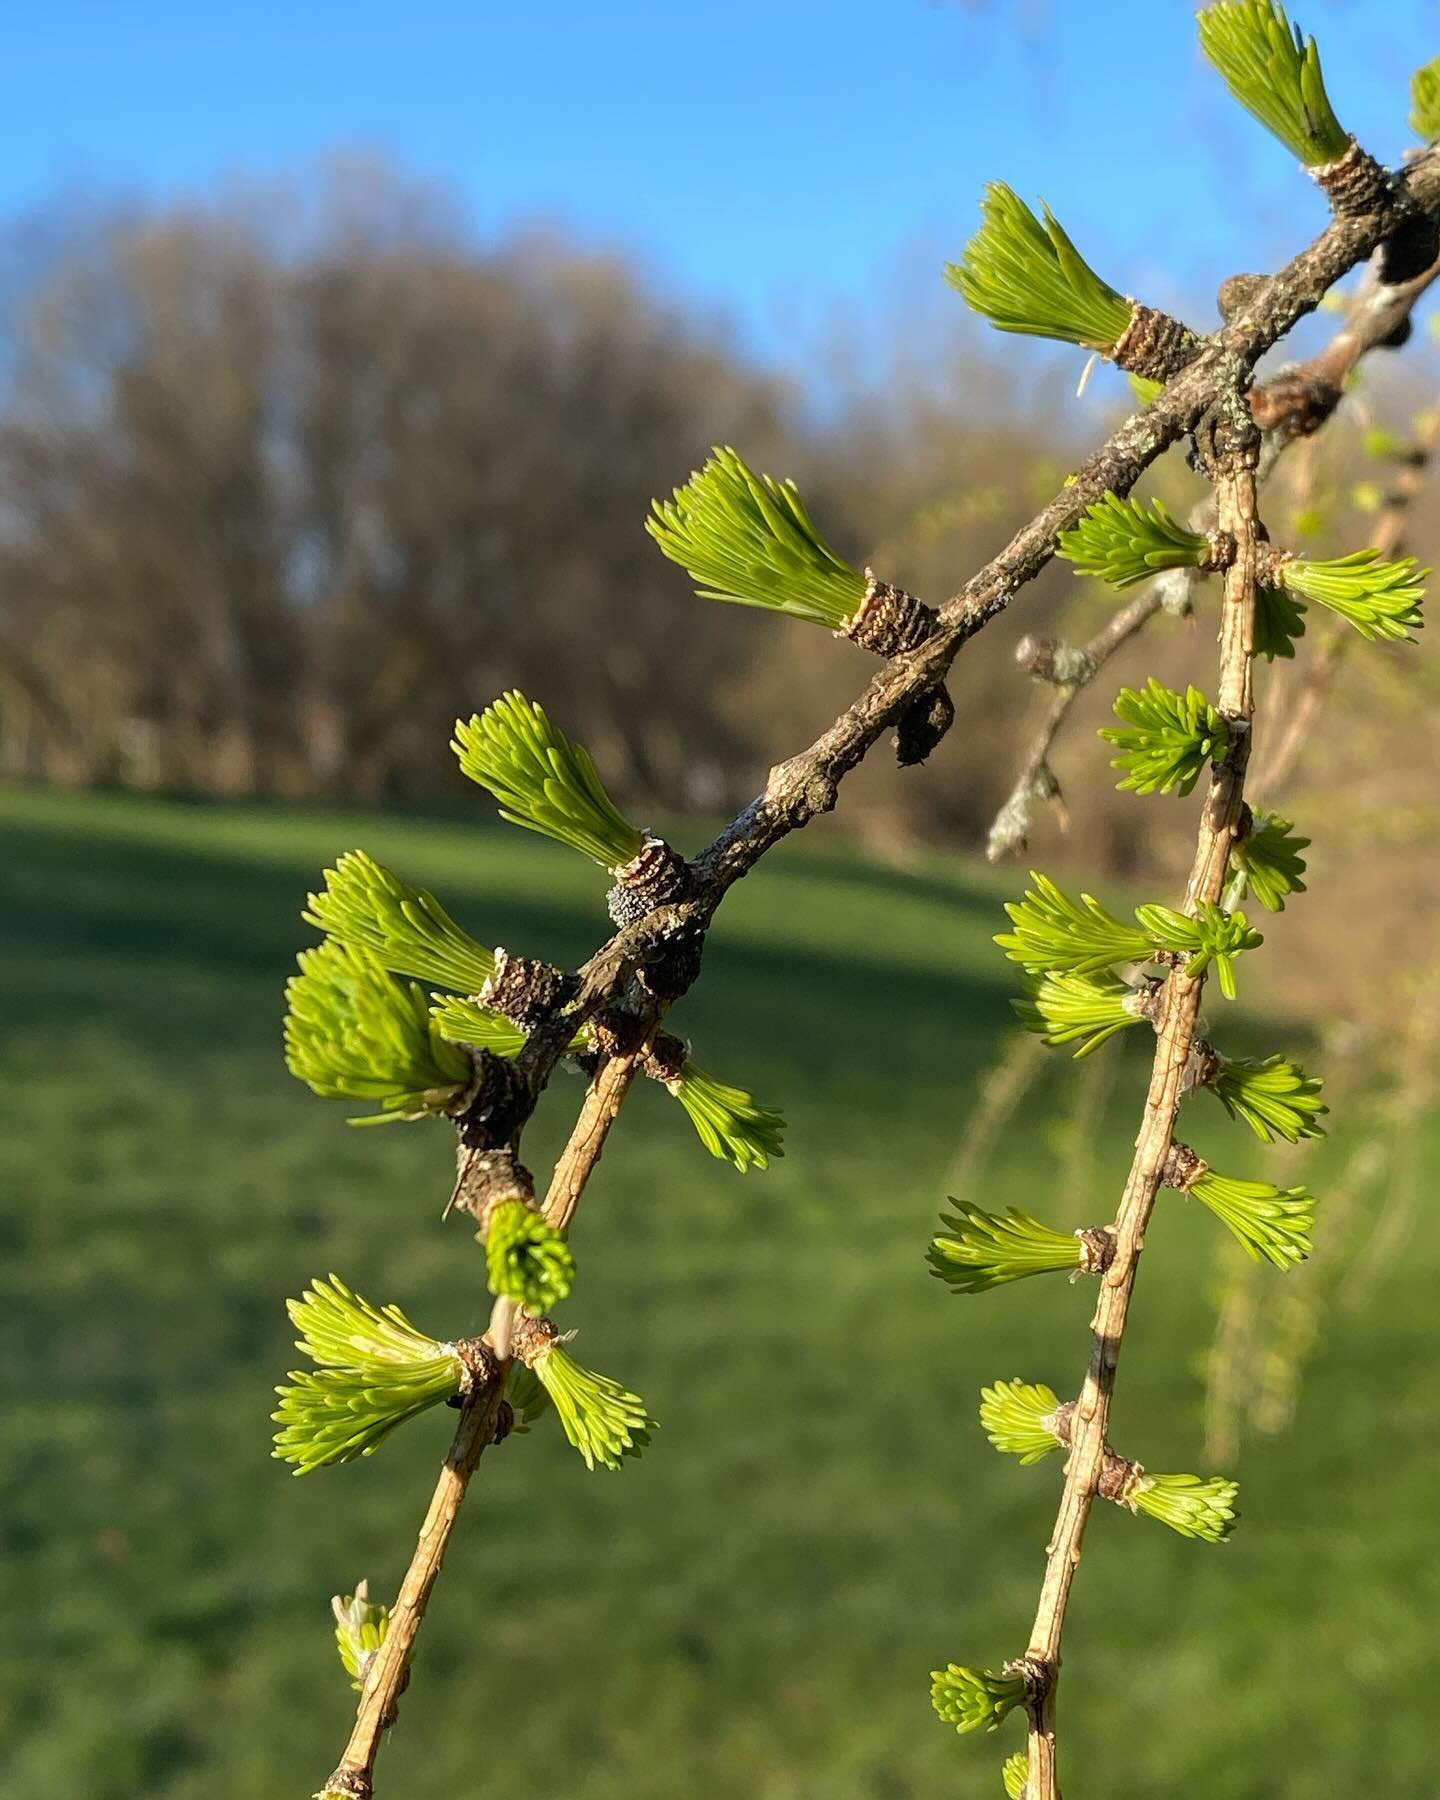 .
Promise. 

That&rsquo;s the word that resonated within as I saw these small buds. 

What might God&rsquo;s promise be for you this season? 

The one promise of God that I cling to (always!) is the one where God promises to be with us, to &ldquo;nev